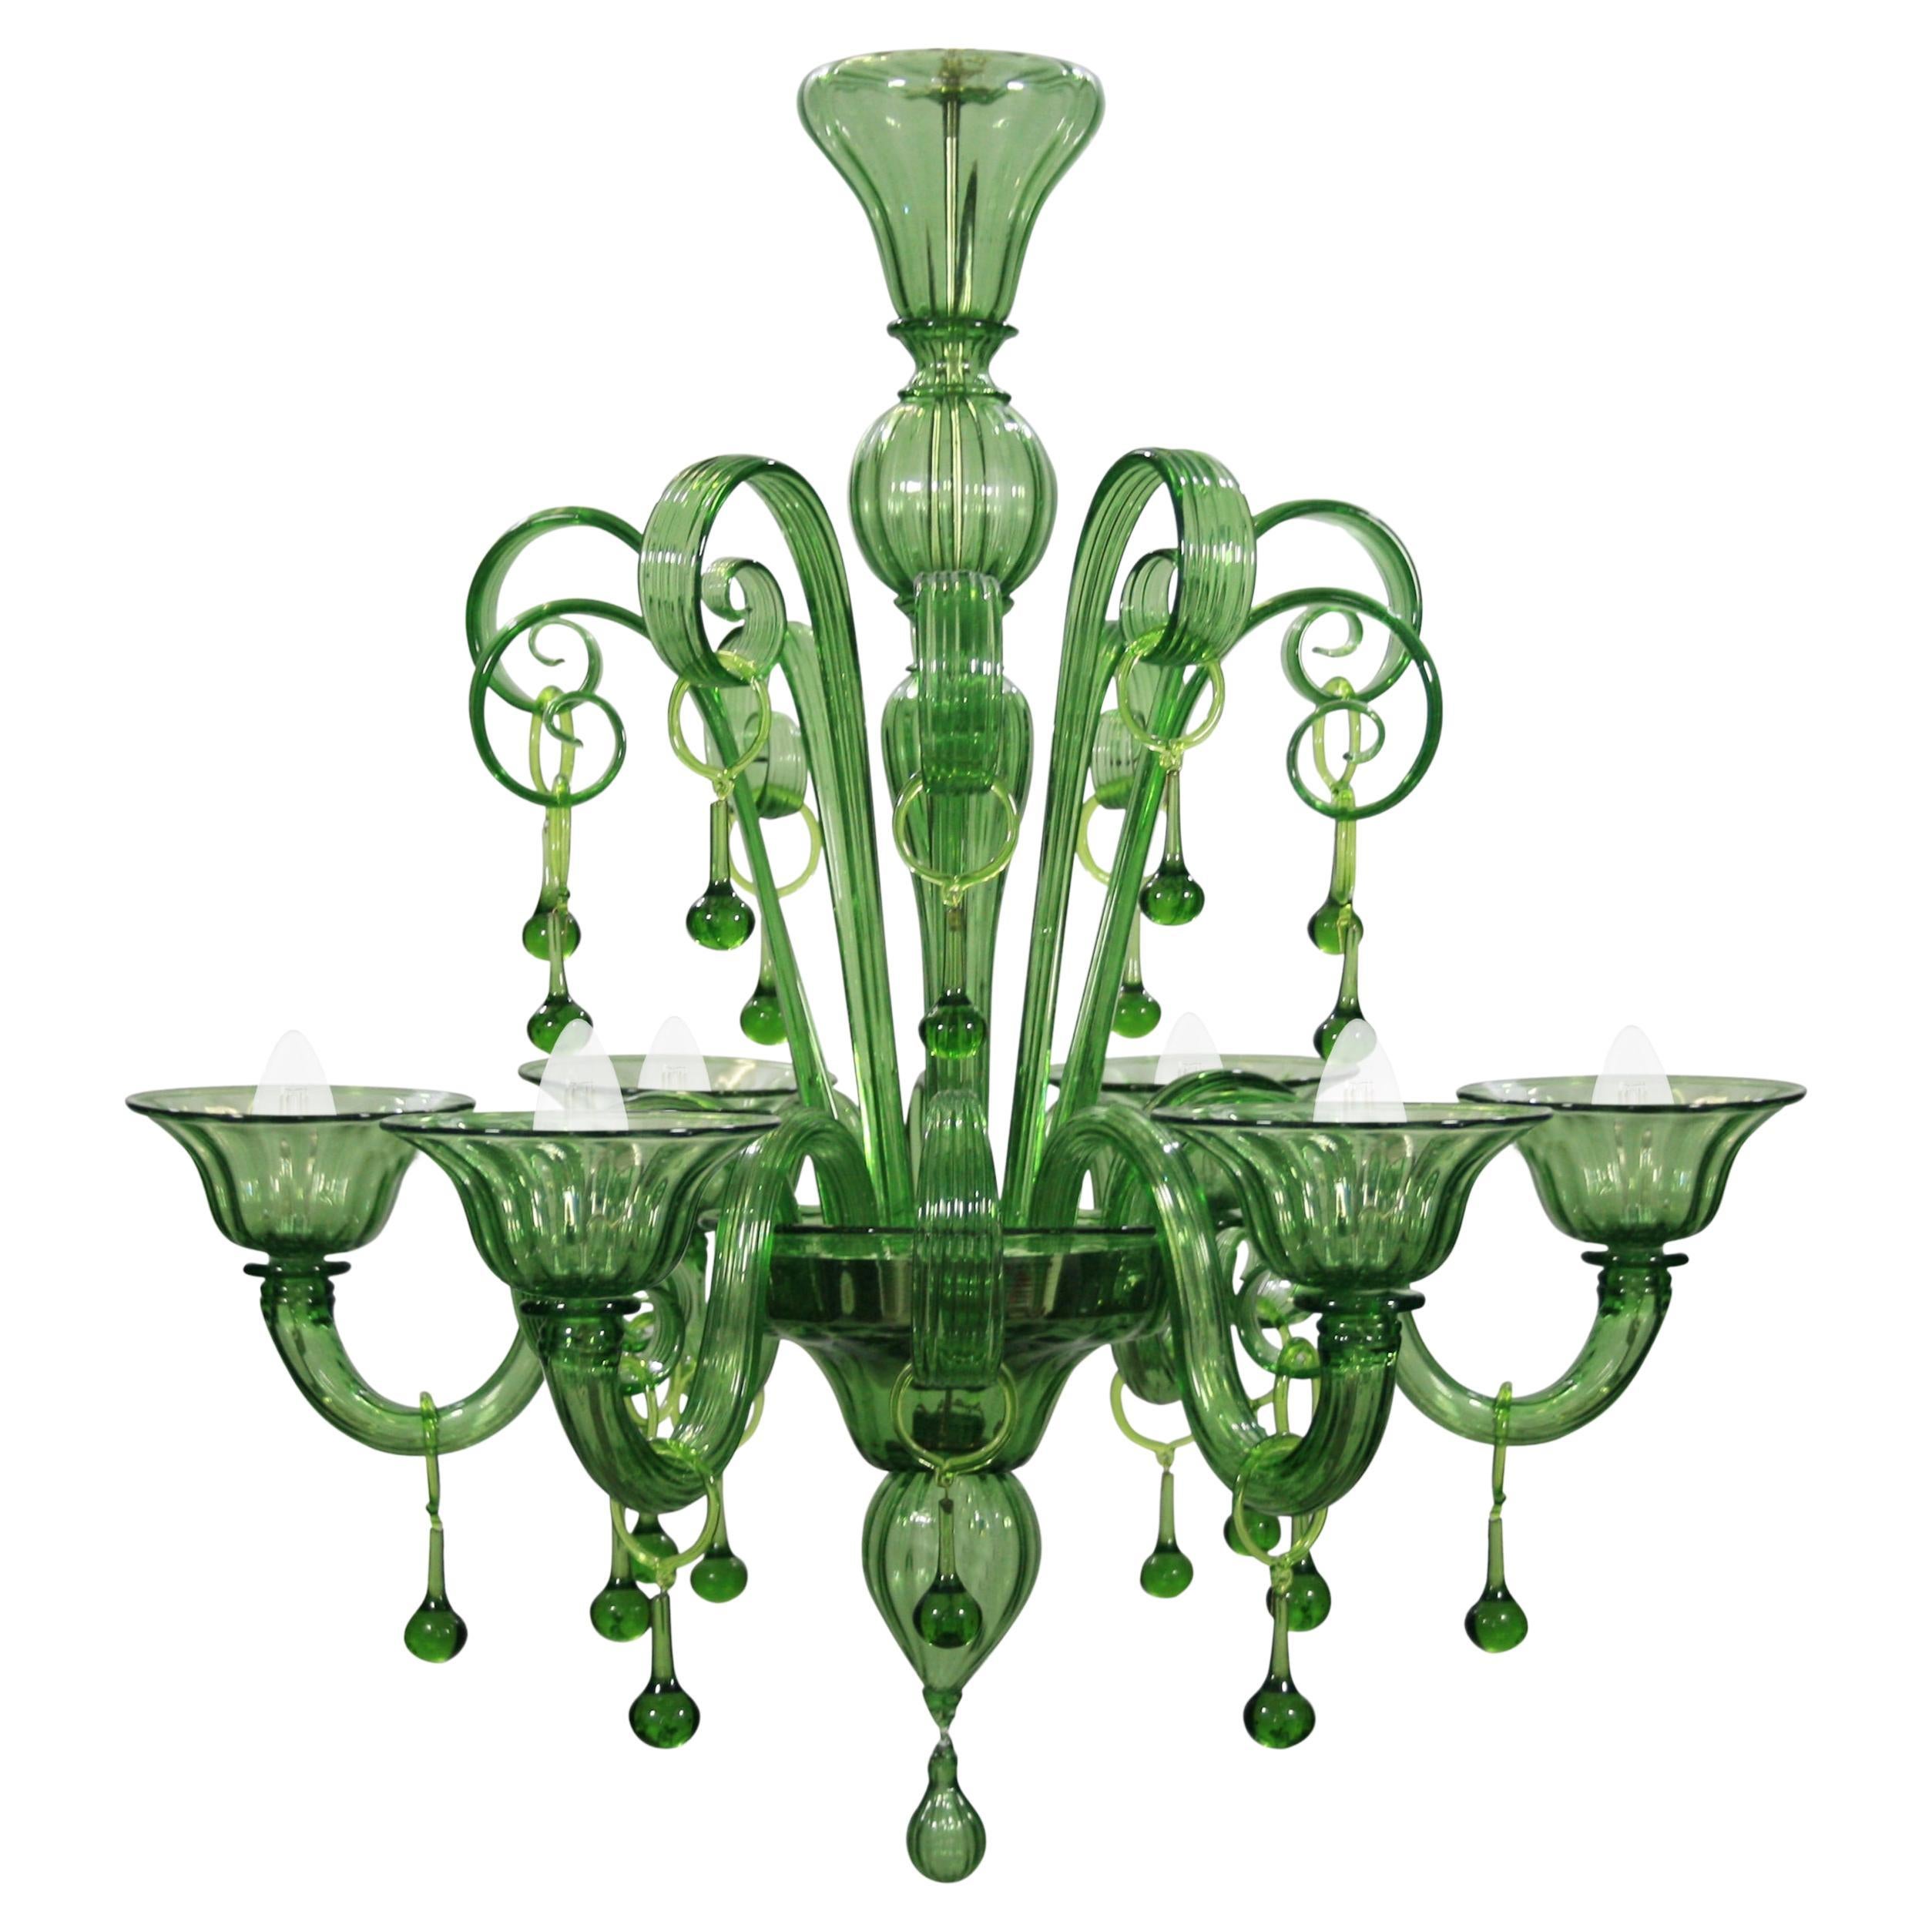 Rich Chandelier 6 Arms Green Handblown Artistic Murano Glass by Multiforme For Sale